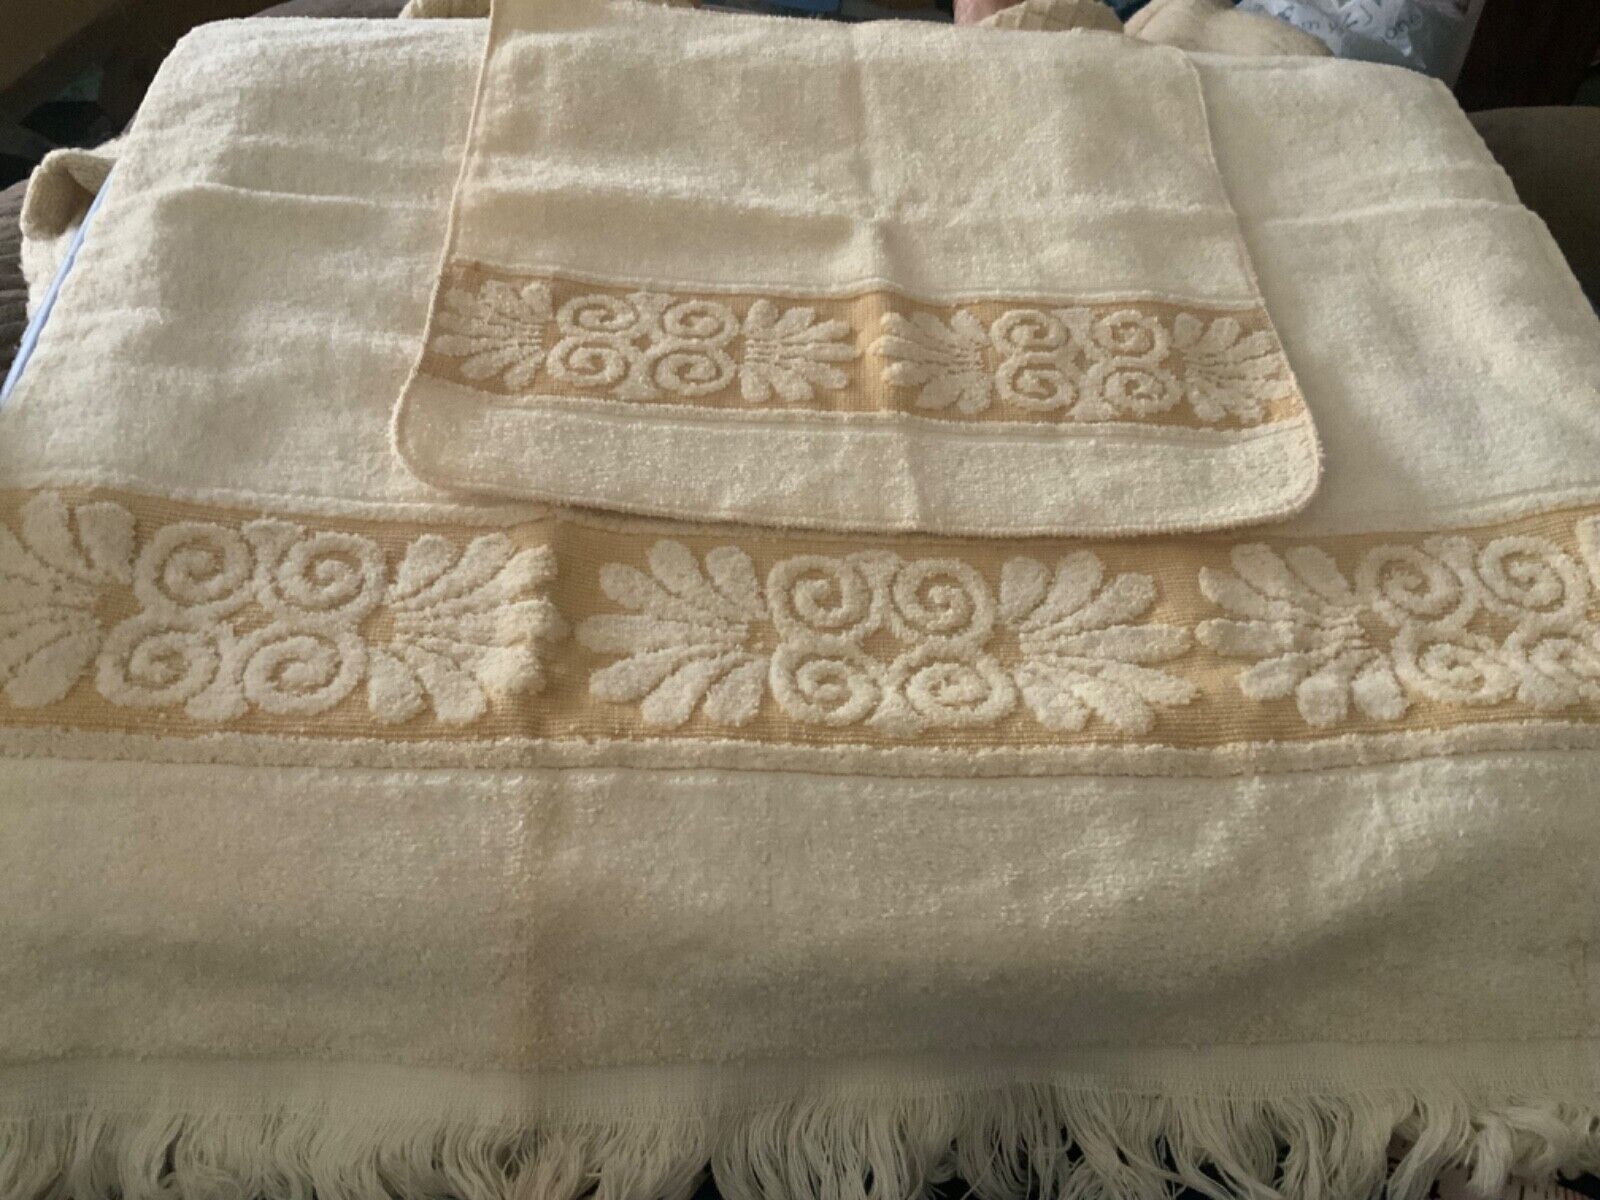 VINTAGE TOWEL SET lot of 4 YELLOW EMBOSSED CANNON MONTICELLO 2 bath & wash cloth